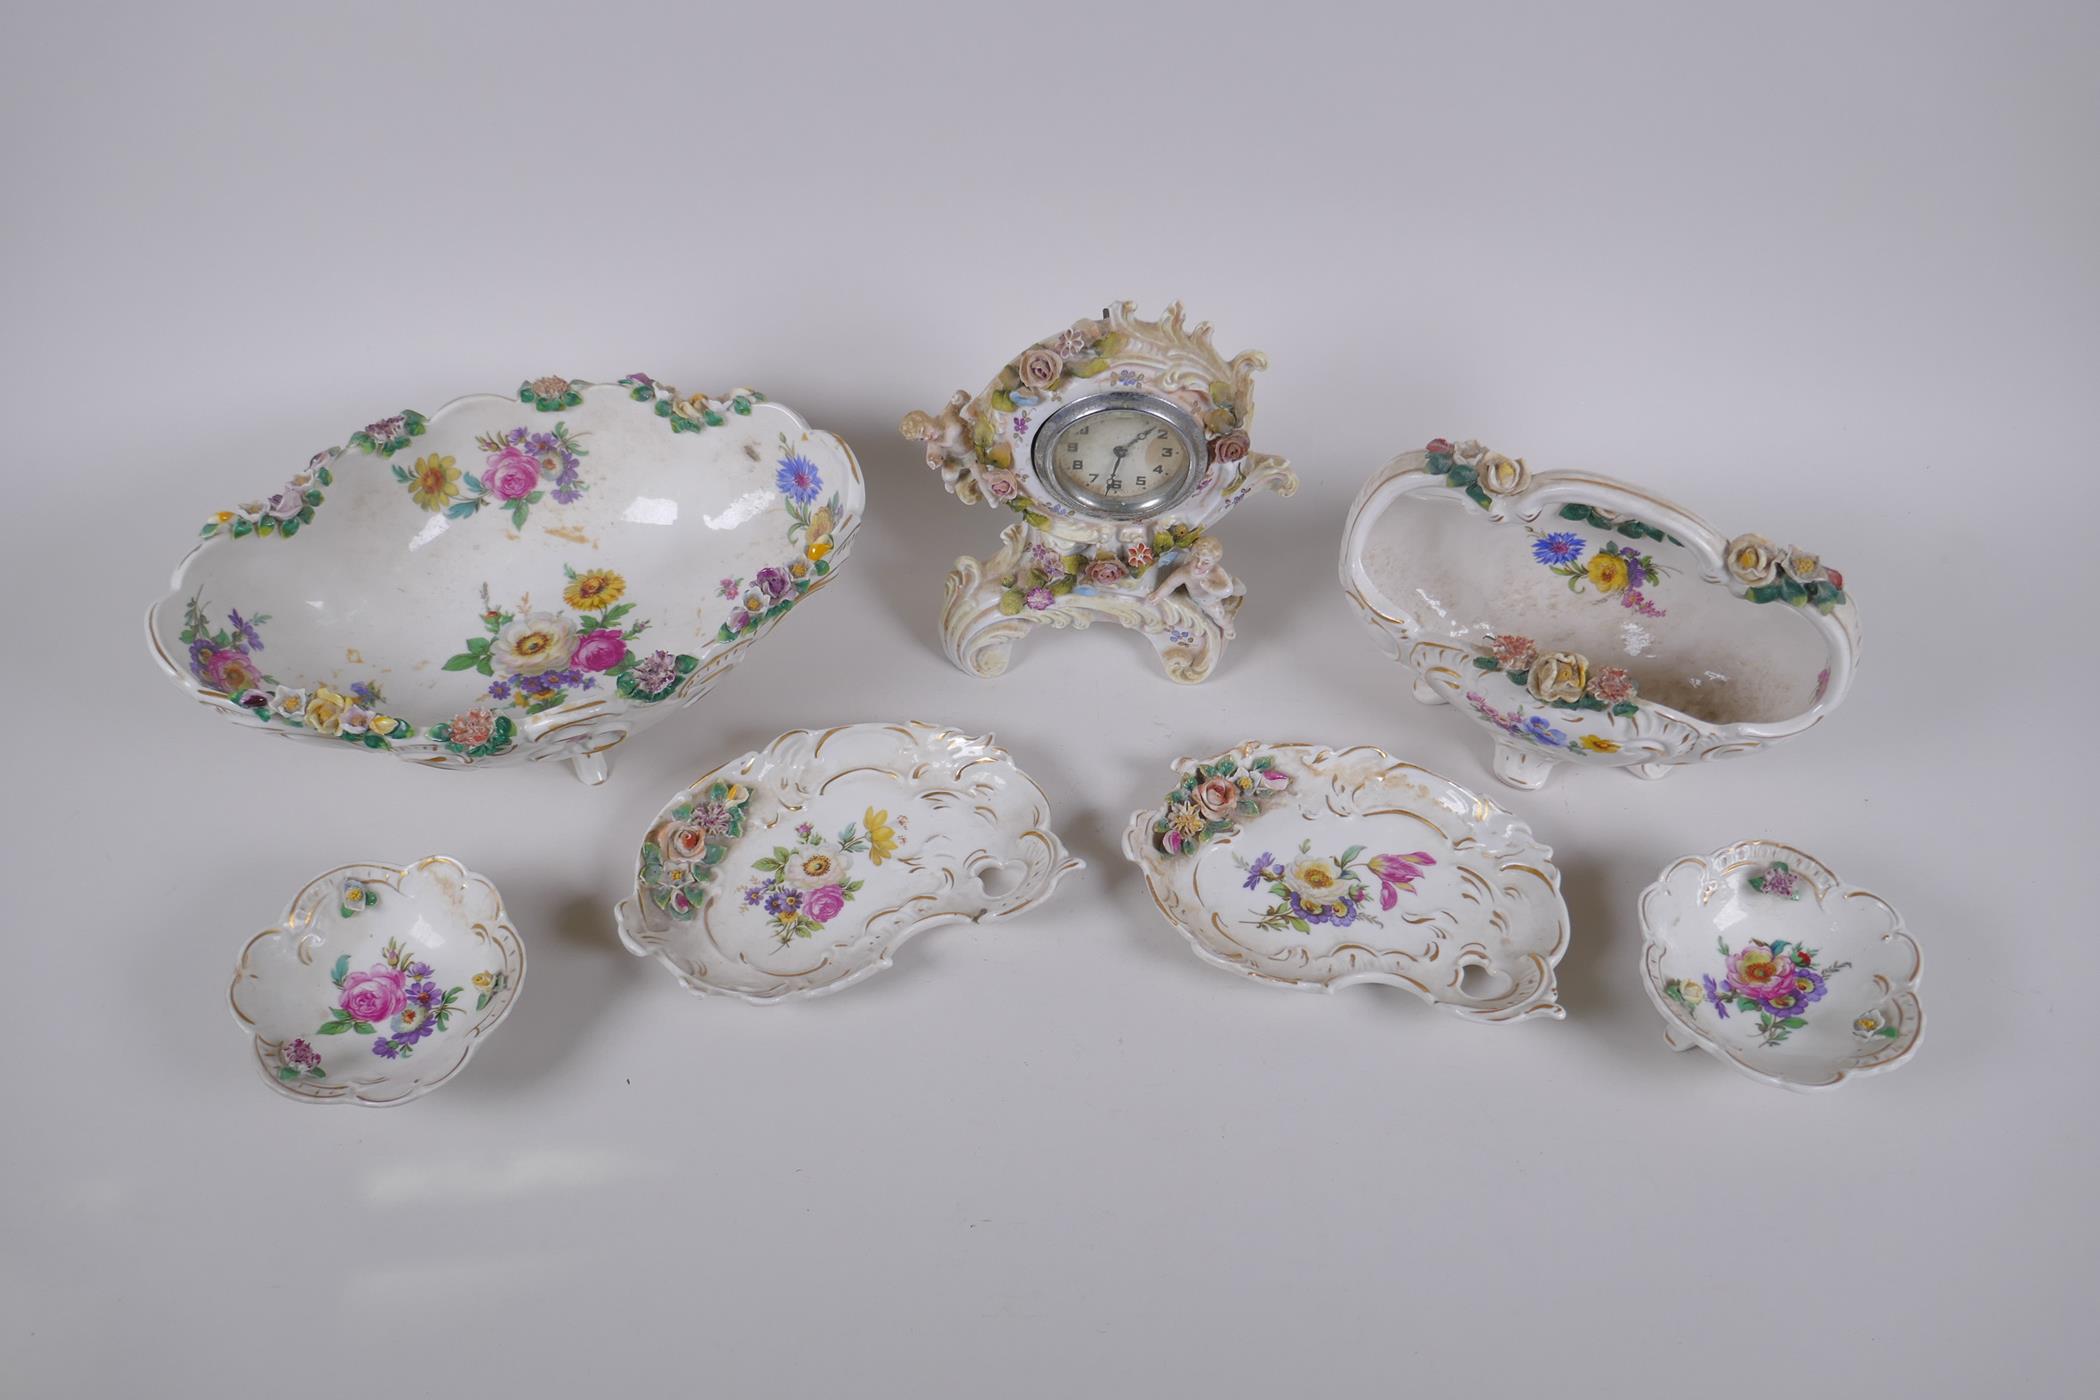 A collection of late C19th/early C20th Dresden porcelain, including a desk clock, trinket dishes, - Image 2 of 8